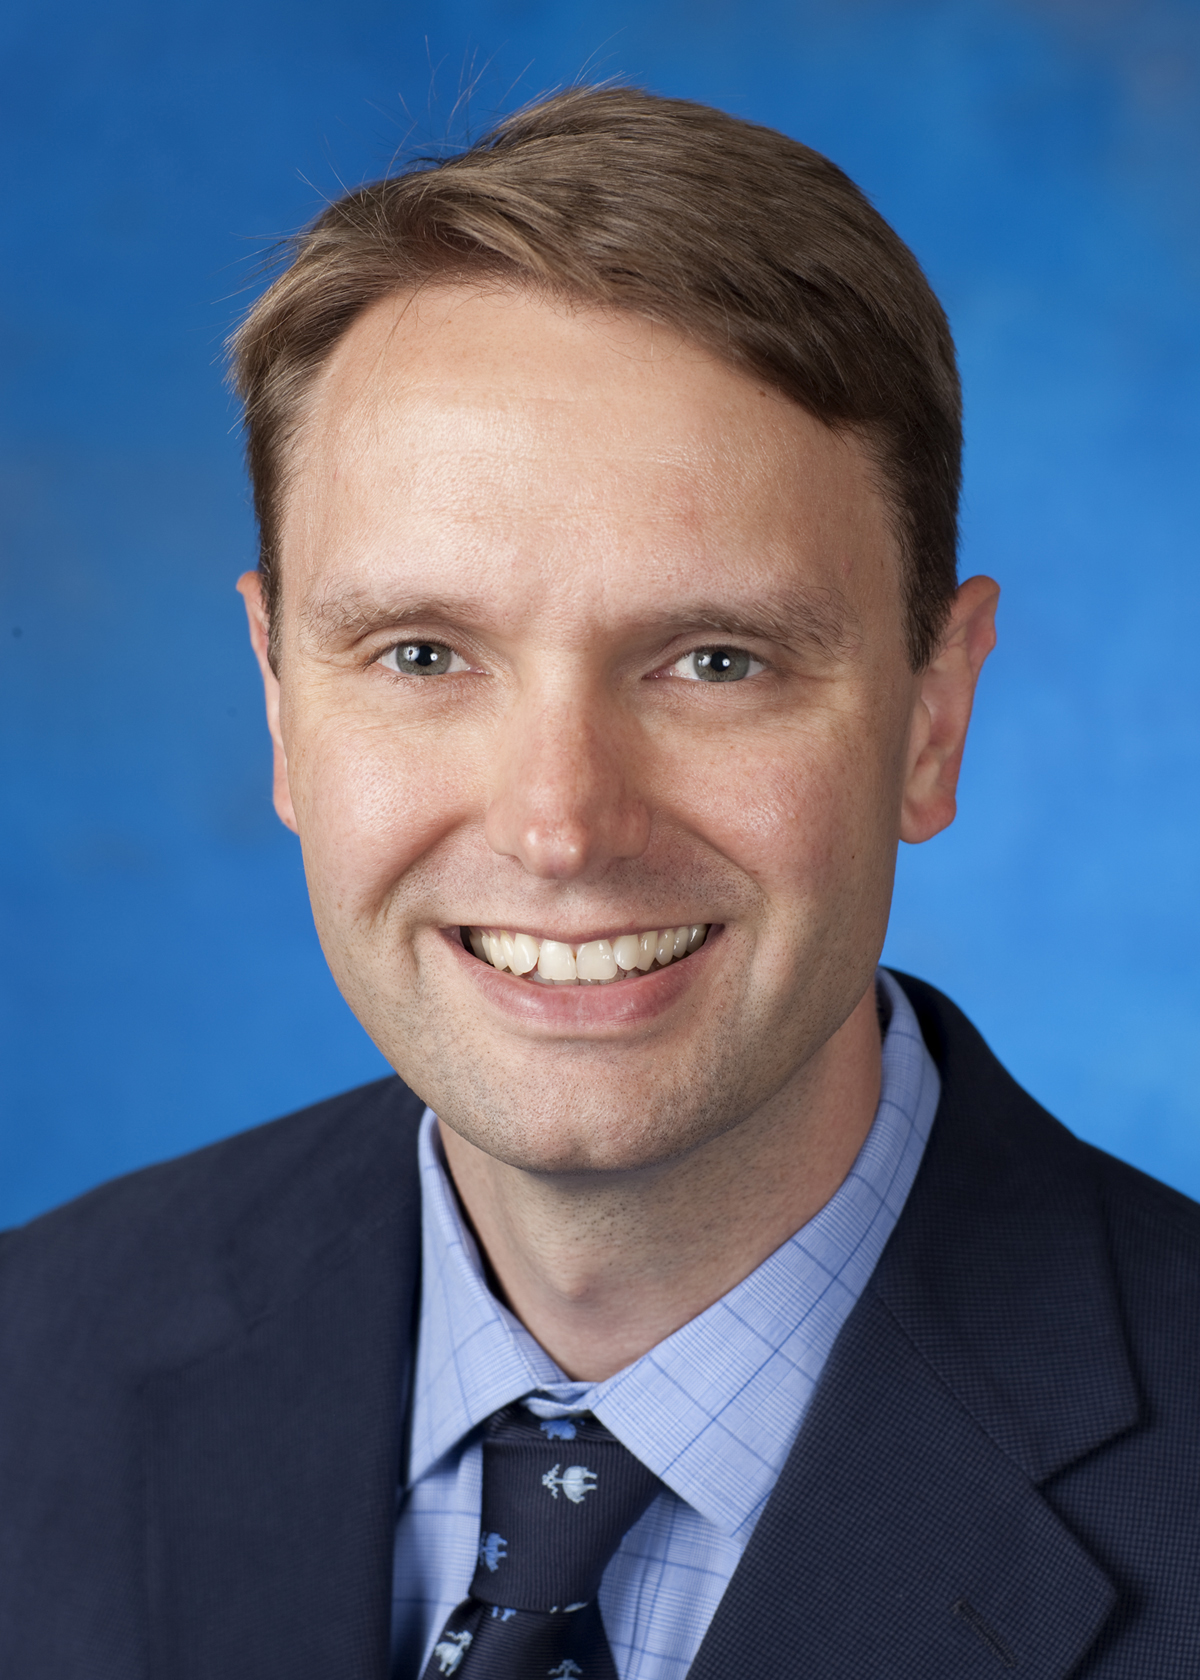 board-certified interventional cardiologist, Todd Justice, MD